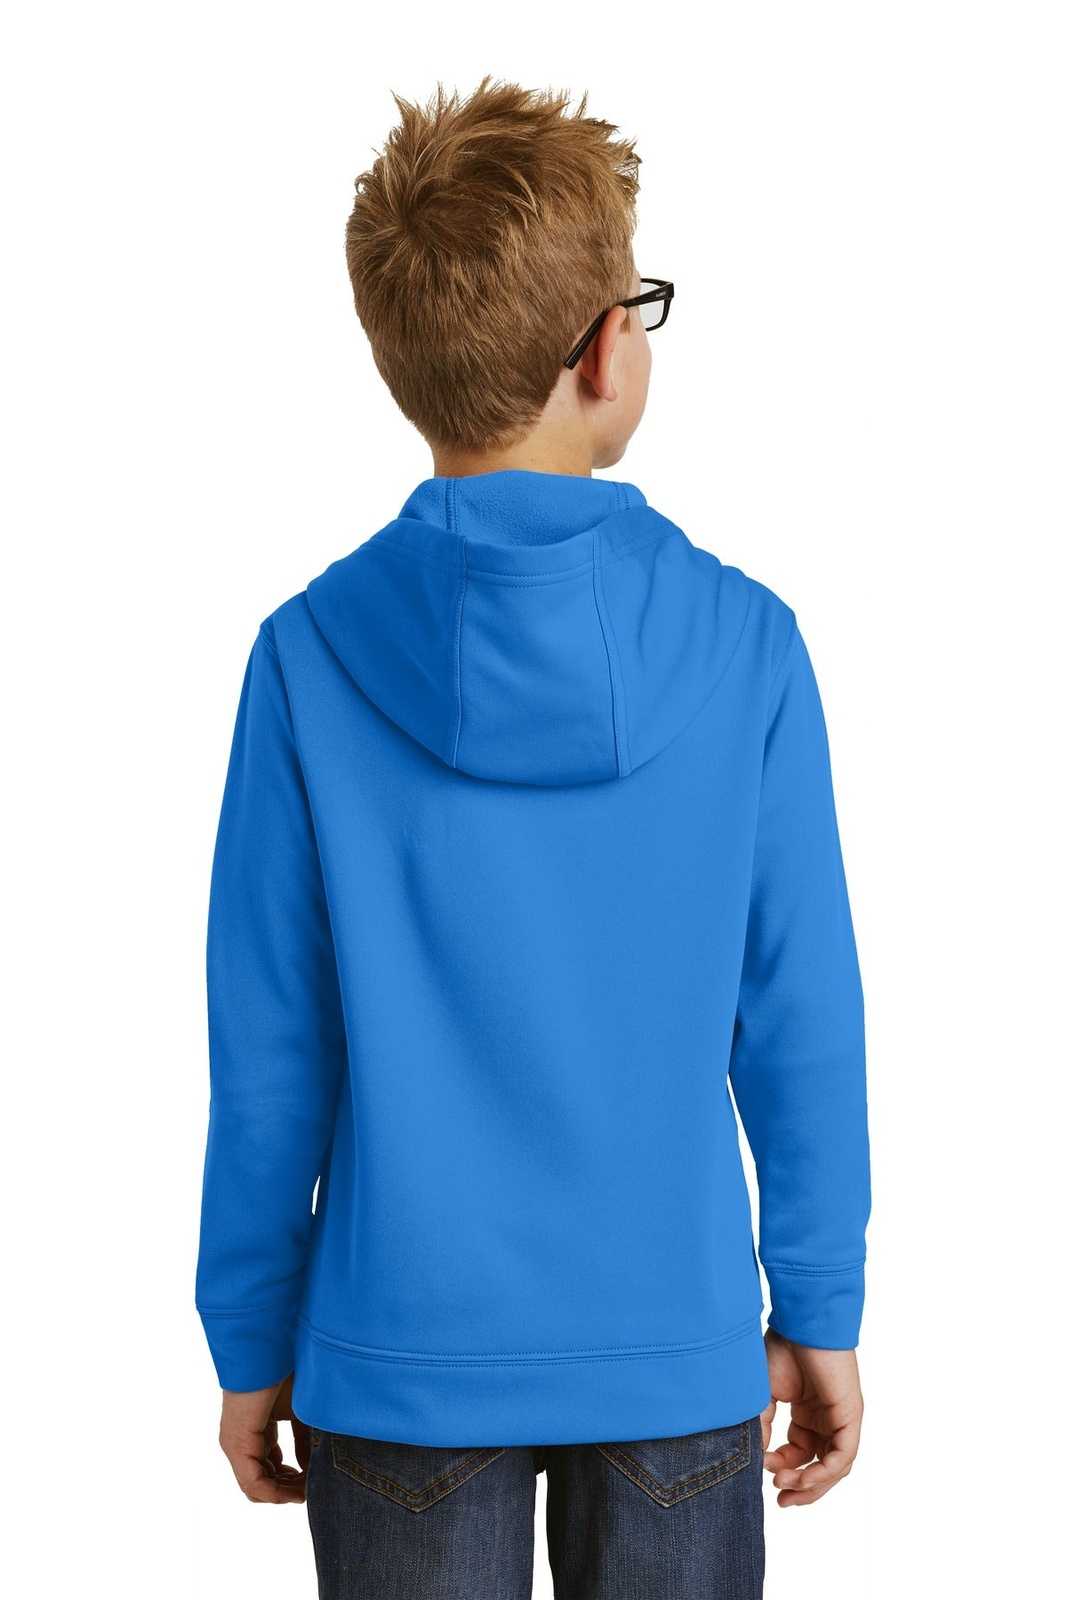 Port & Company PC590YH Youth Performance Fleece Pullover Hooded Sweatshirt - Royal - HIT a Double - 1